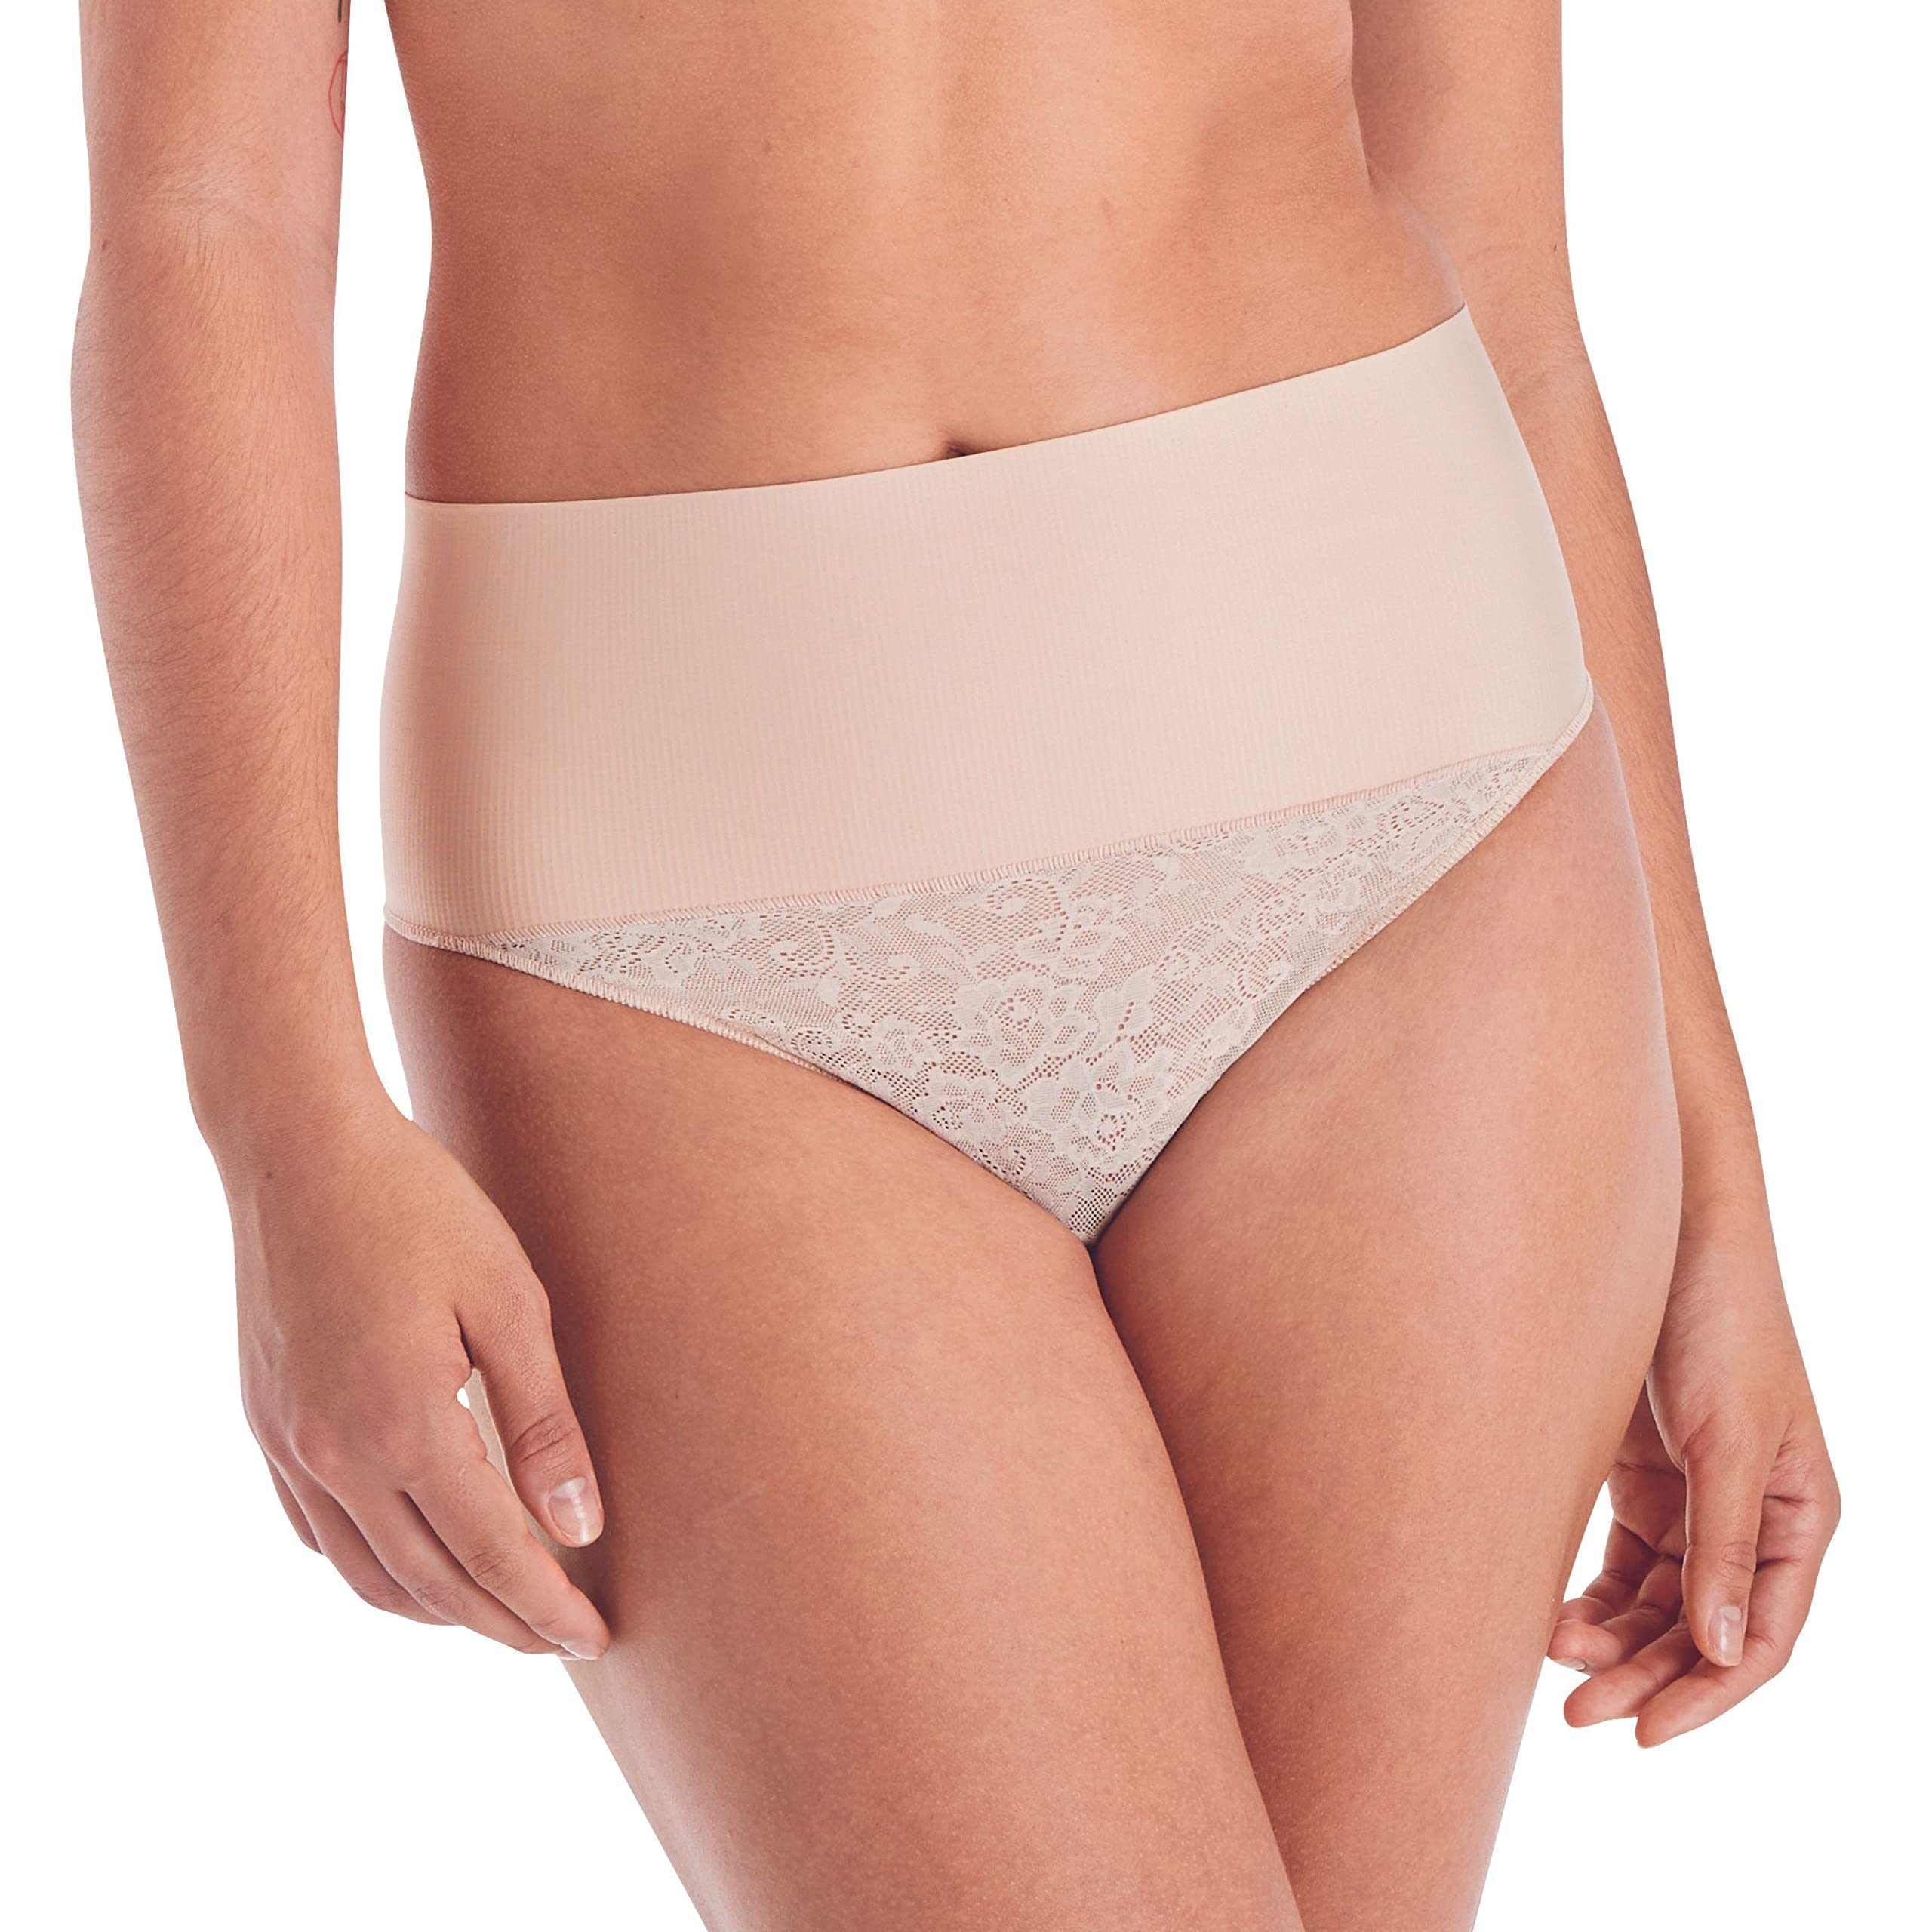 Maidenform womens Tame Your Tummy Lace Thong Panties, Firm Control Shapewear Thong, Cool Comfort